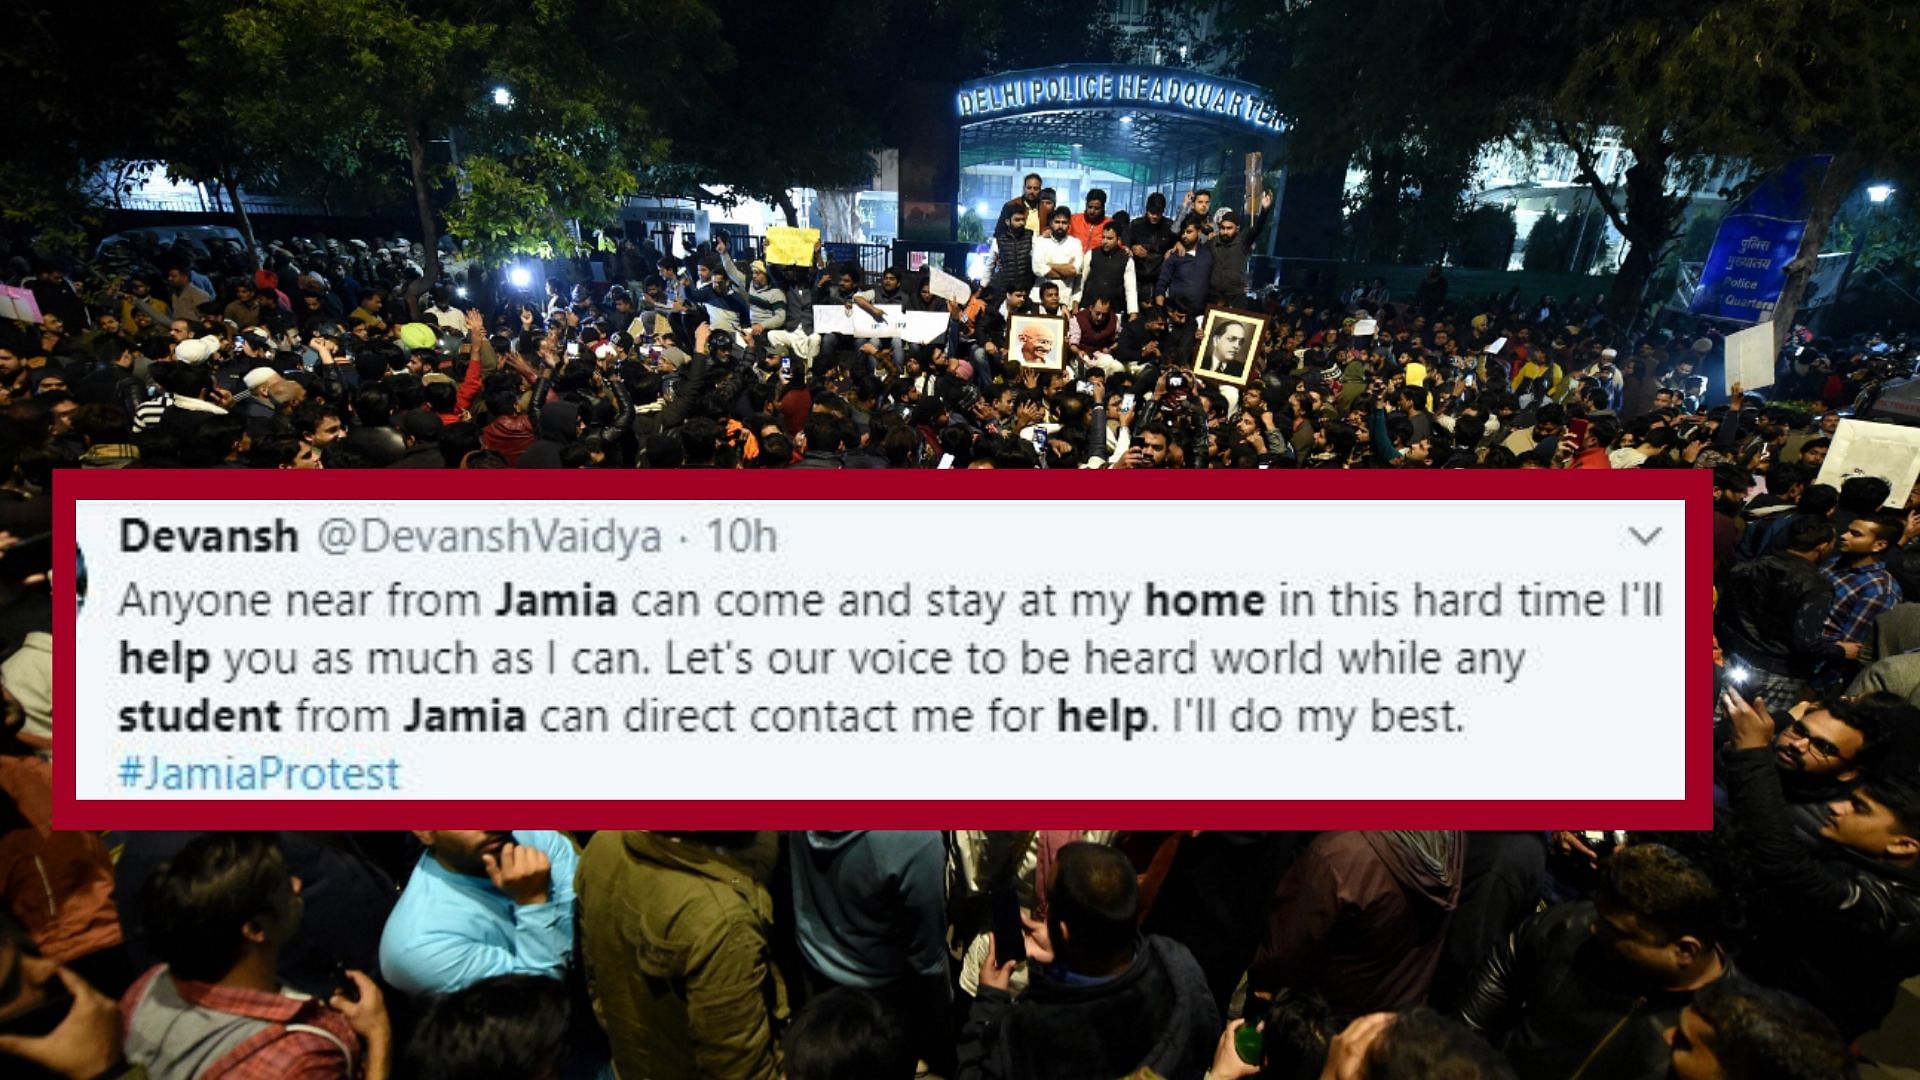 Netizens took to social media offering help to the students.